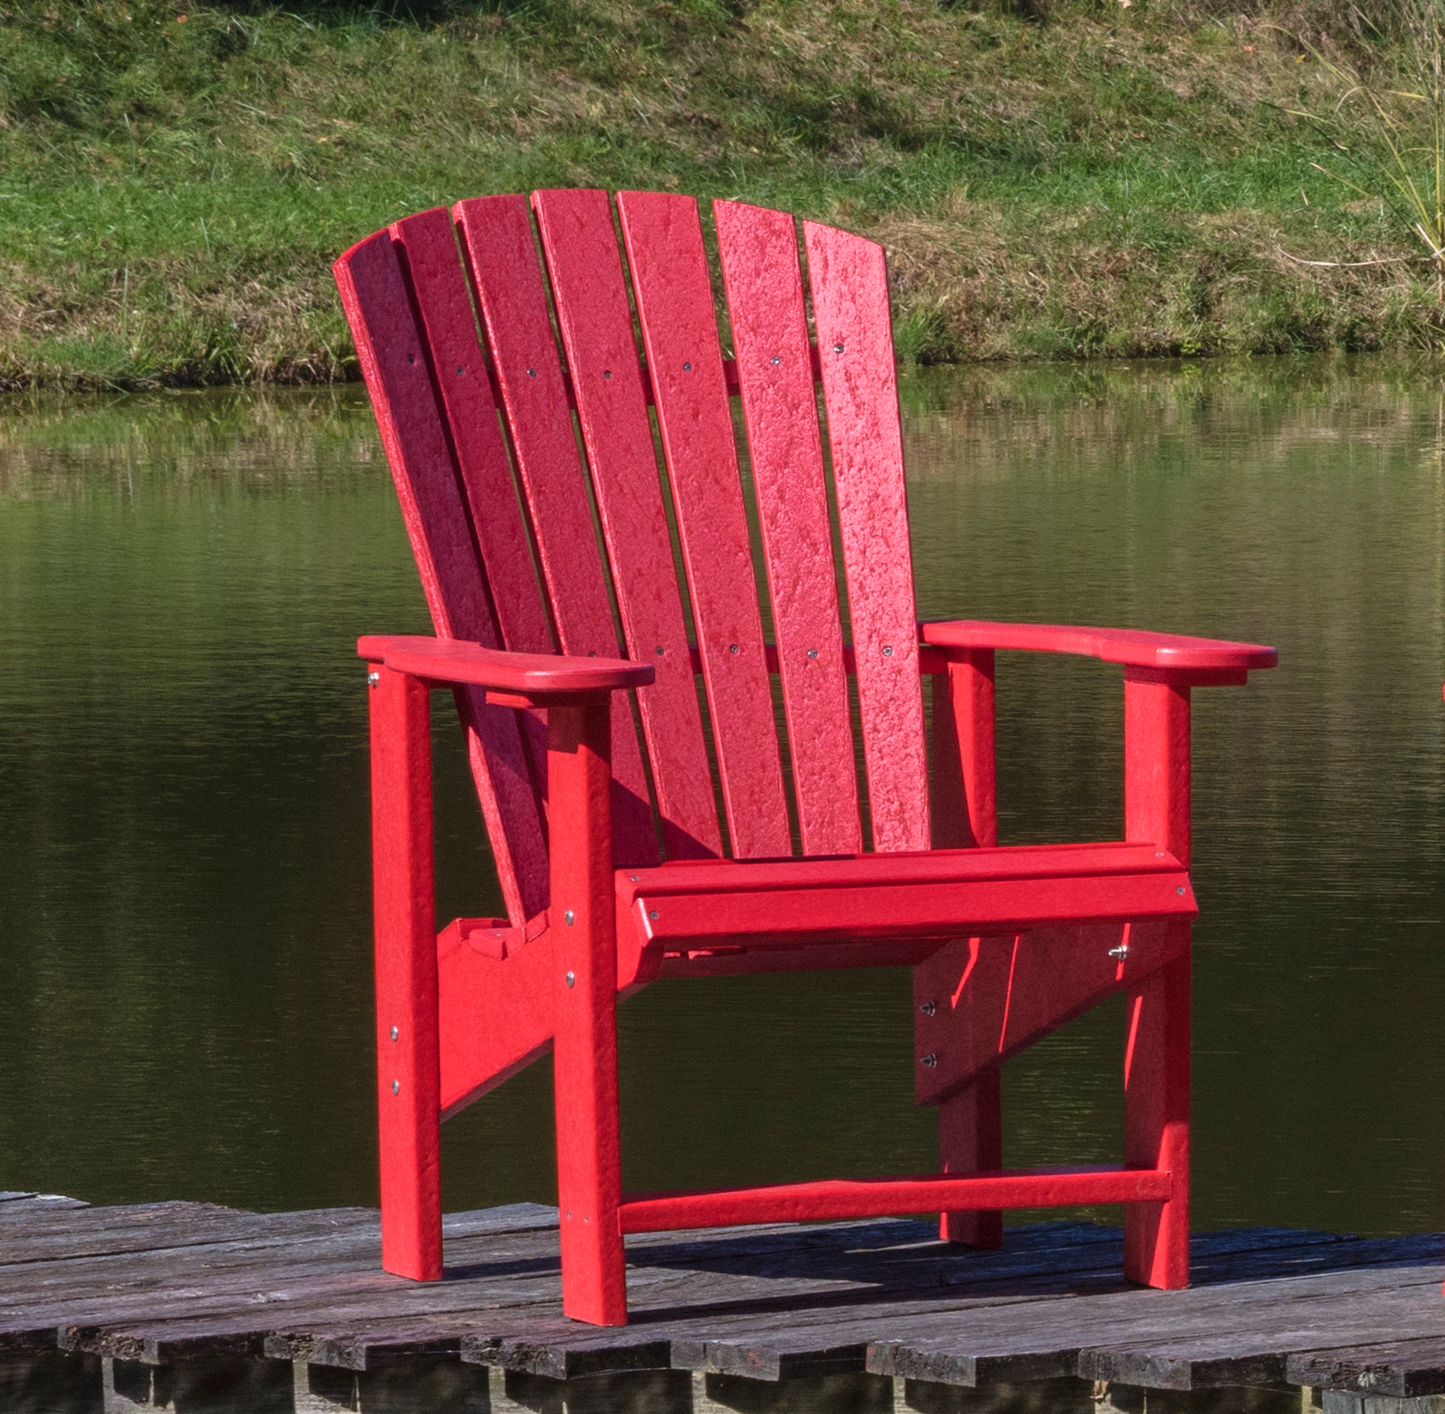 Wildridge LCC-112 Recycled Plastic Heritage Upright Adirondack Chair (QUICK SHIP) - LEAD TIME TO SHIP 3 TO 4 BUSINESS DAYS